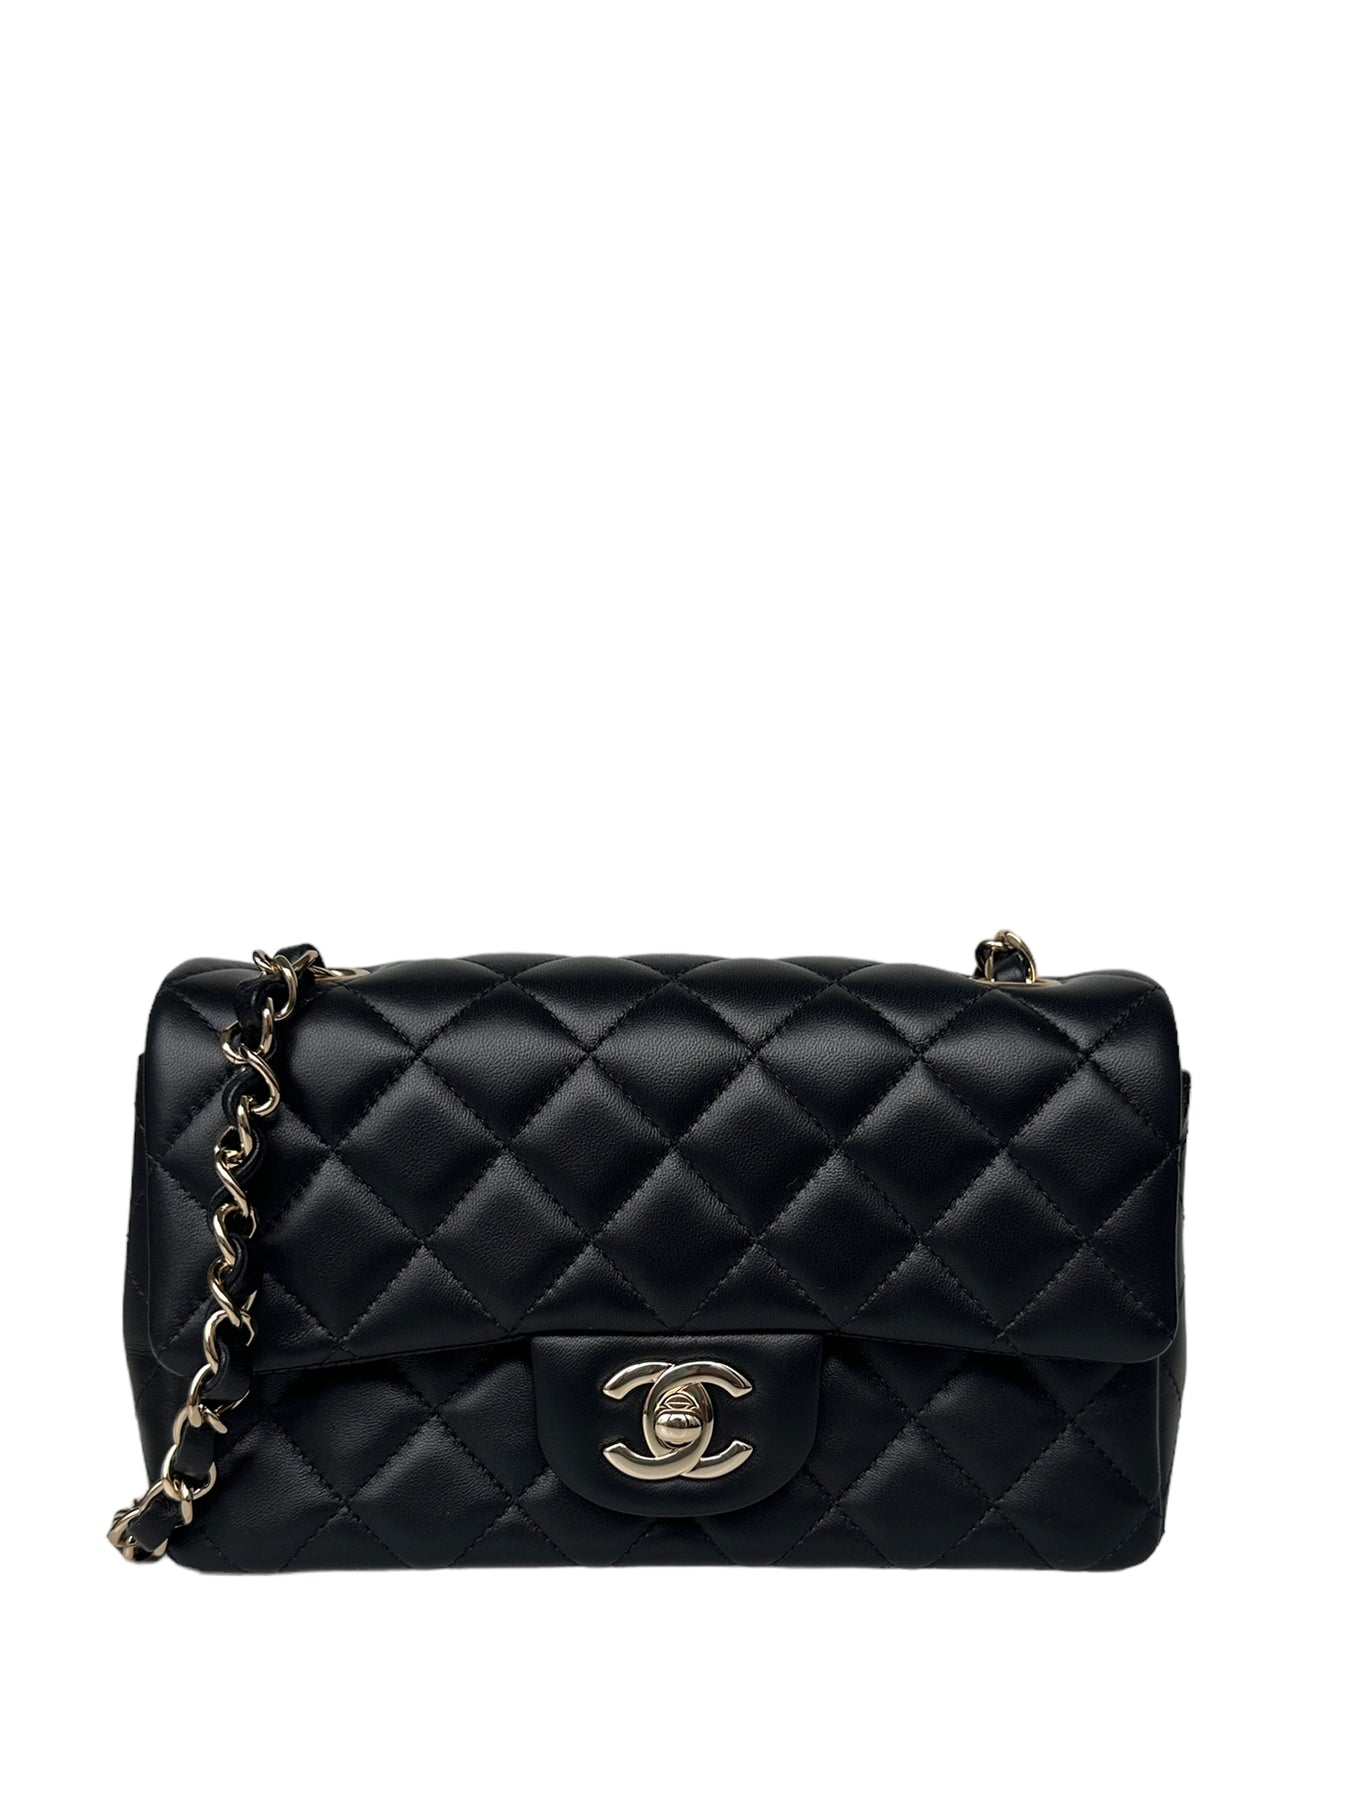 Chanel Black Lambskin Leather Quilted Rectangular Mini Flap Bag